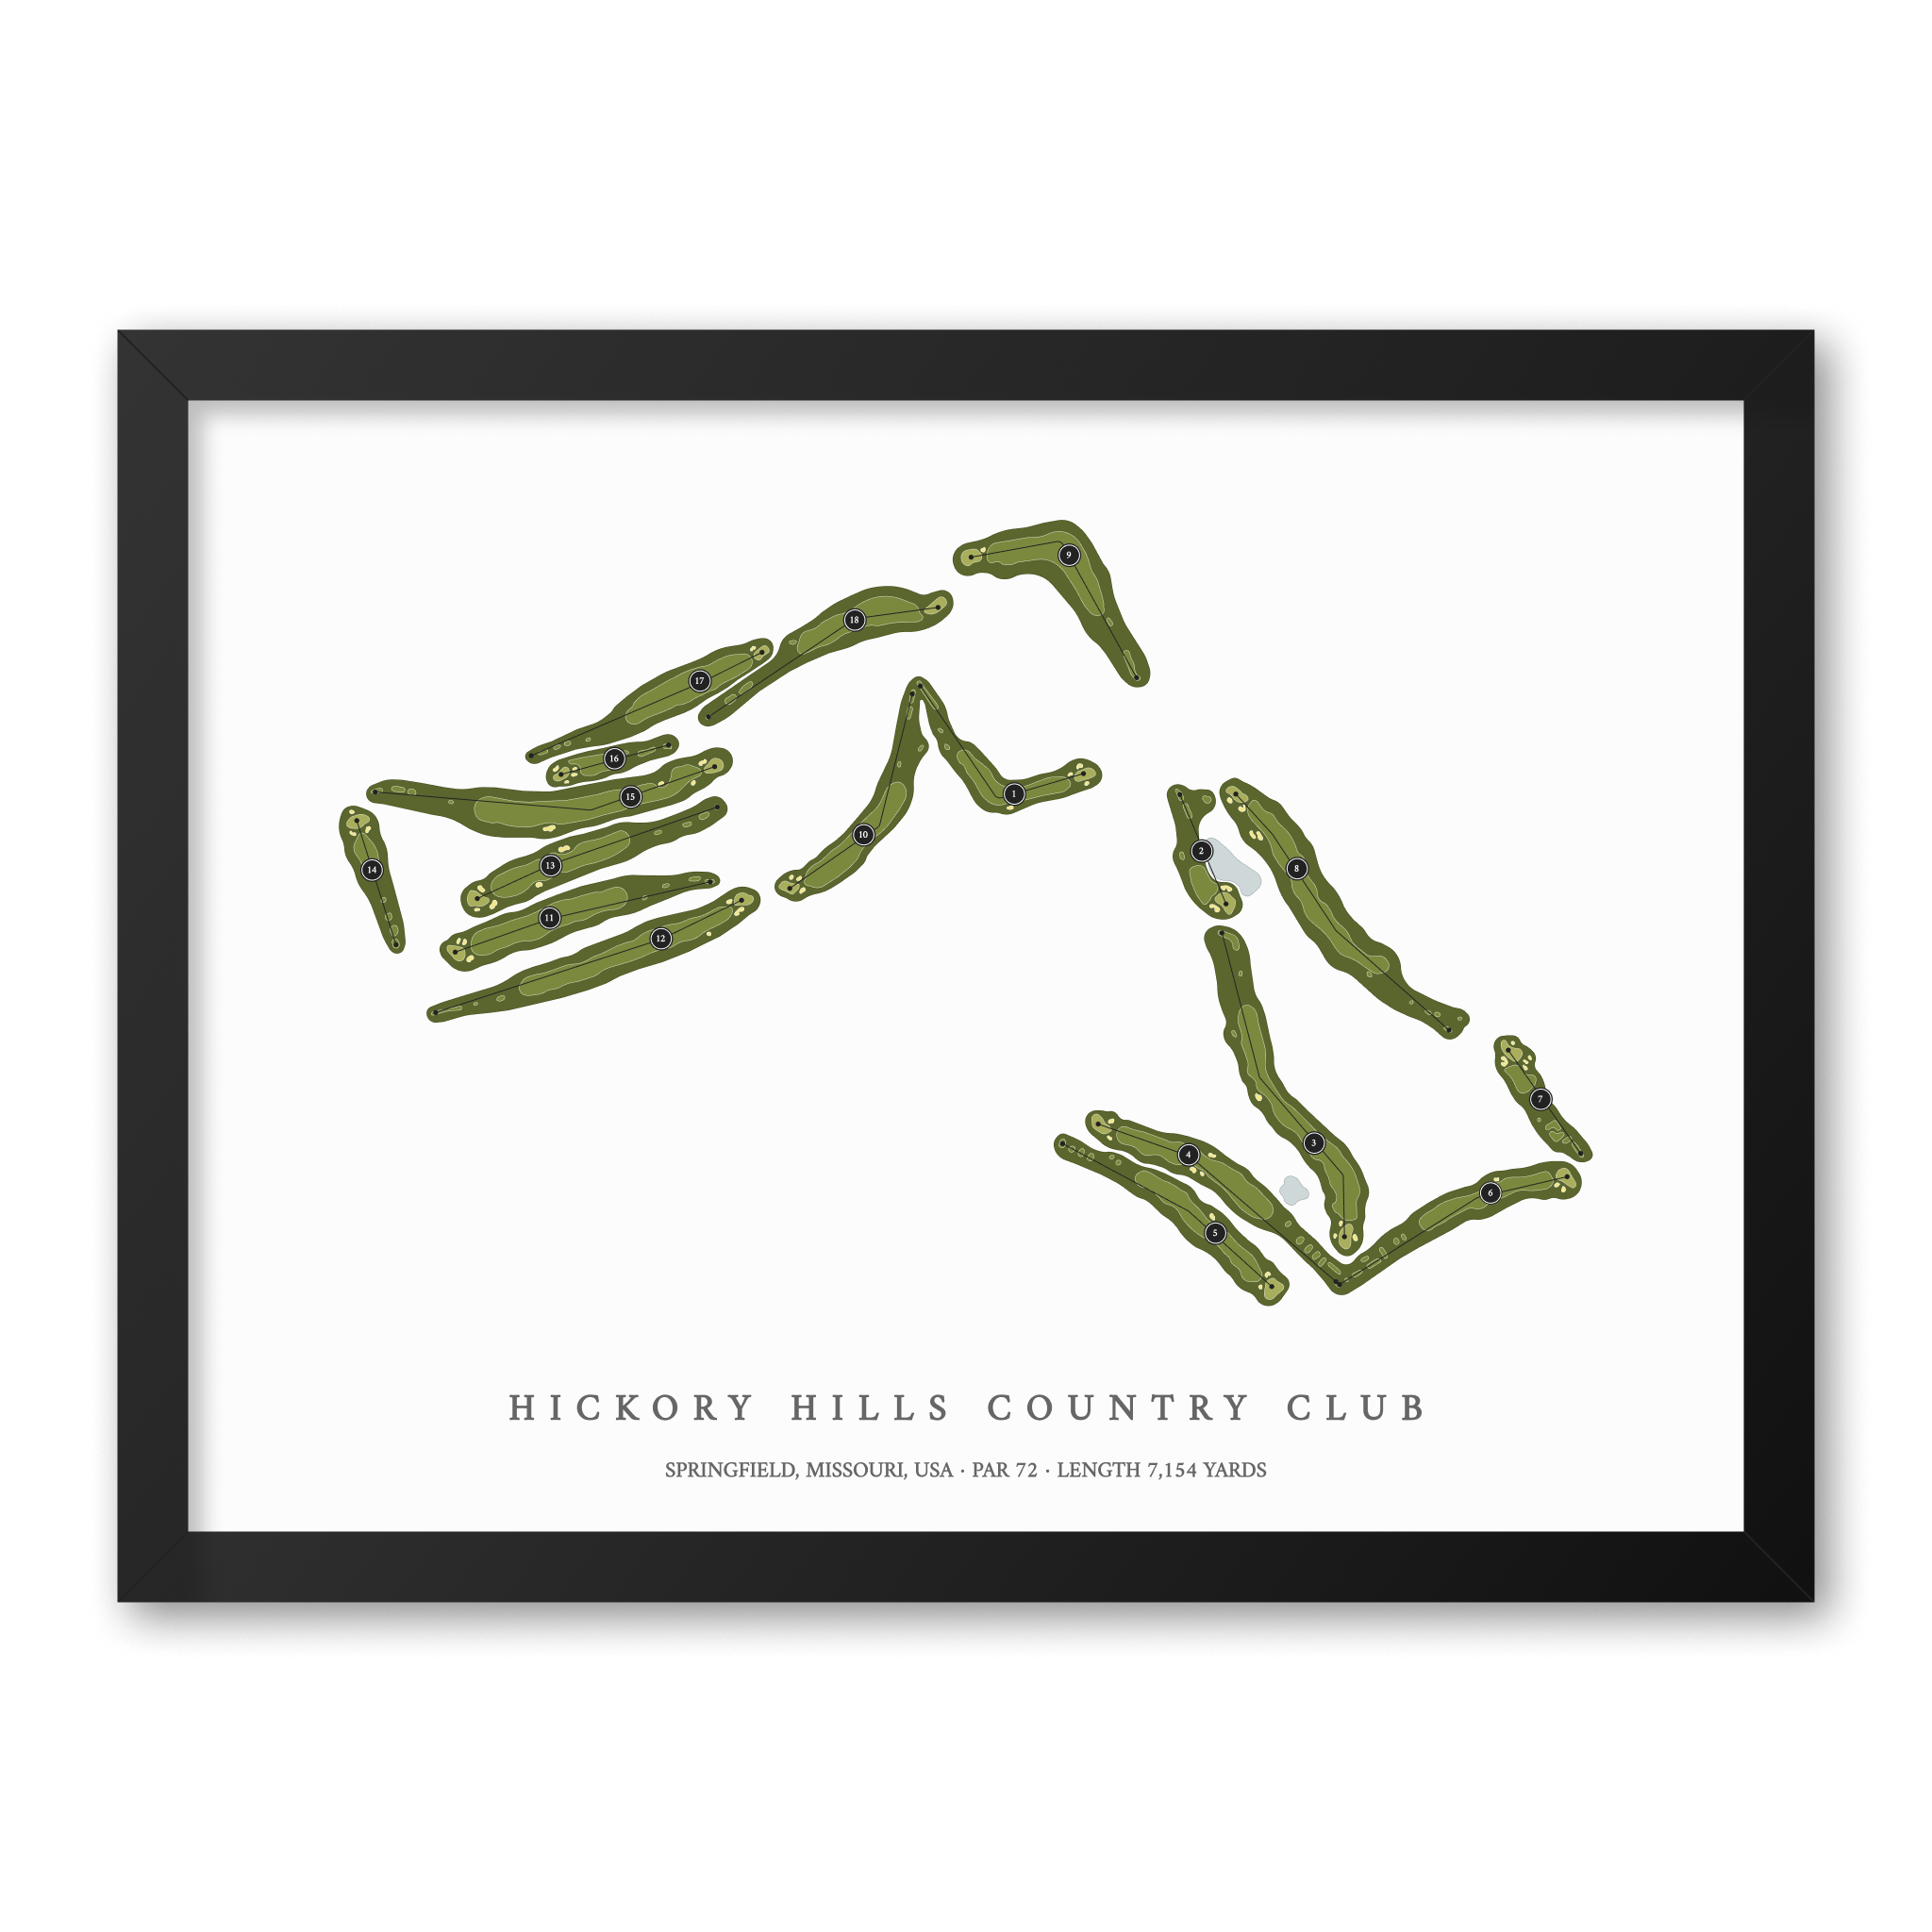 Hickory Hills Country Club| Golf Course Print | Black Frame With Hole Numbers #hole numbers_yes